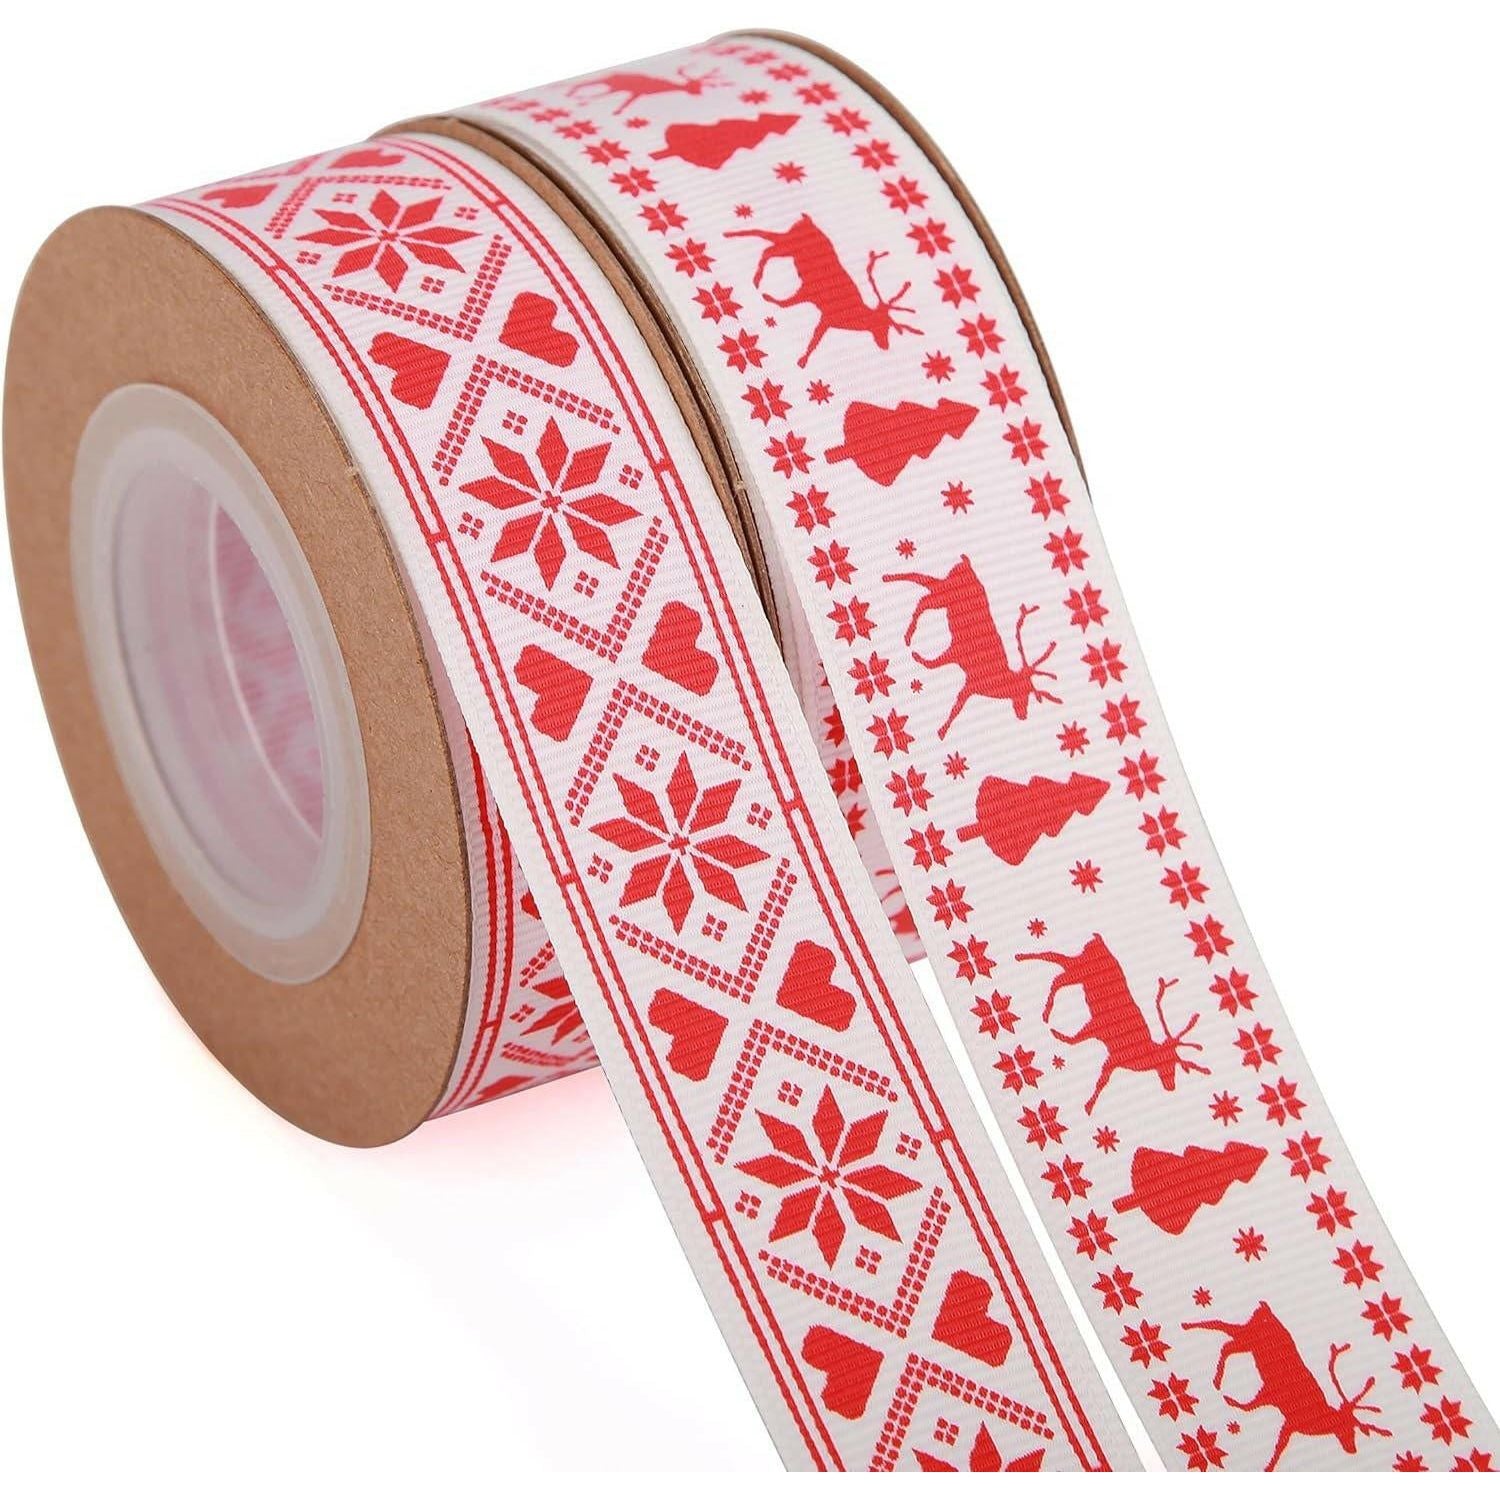 Scandinavian Christmas Ribbon Total 20 Yards 1 Inch Wide Red and White Nordic Trim Scandi Reindeer and Snowflake Ribbon - The European Gift Store